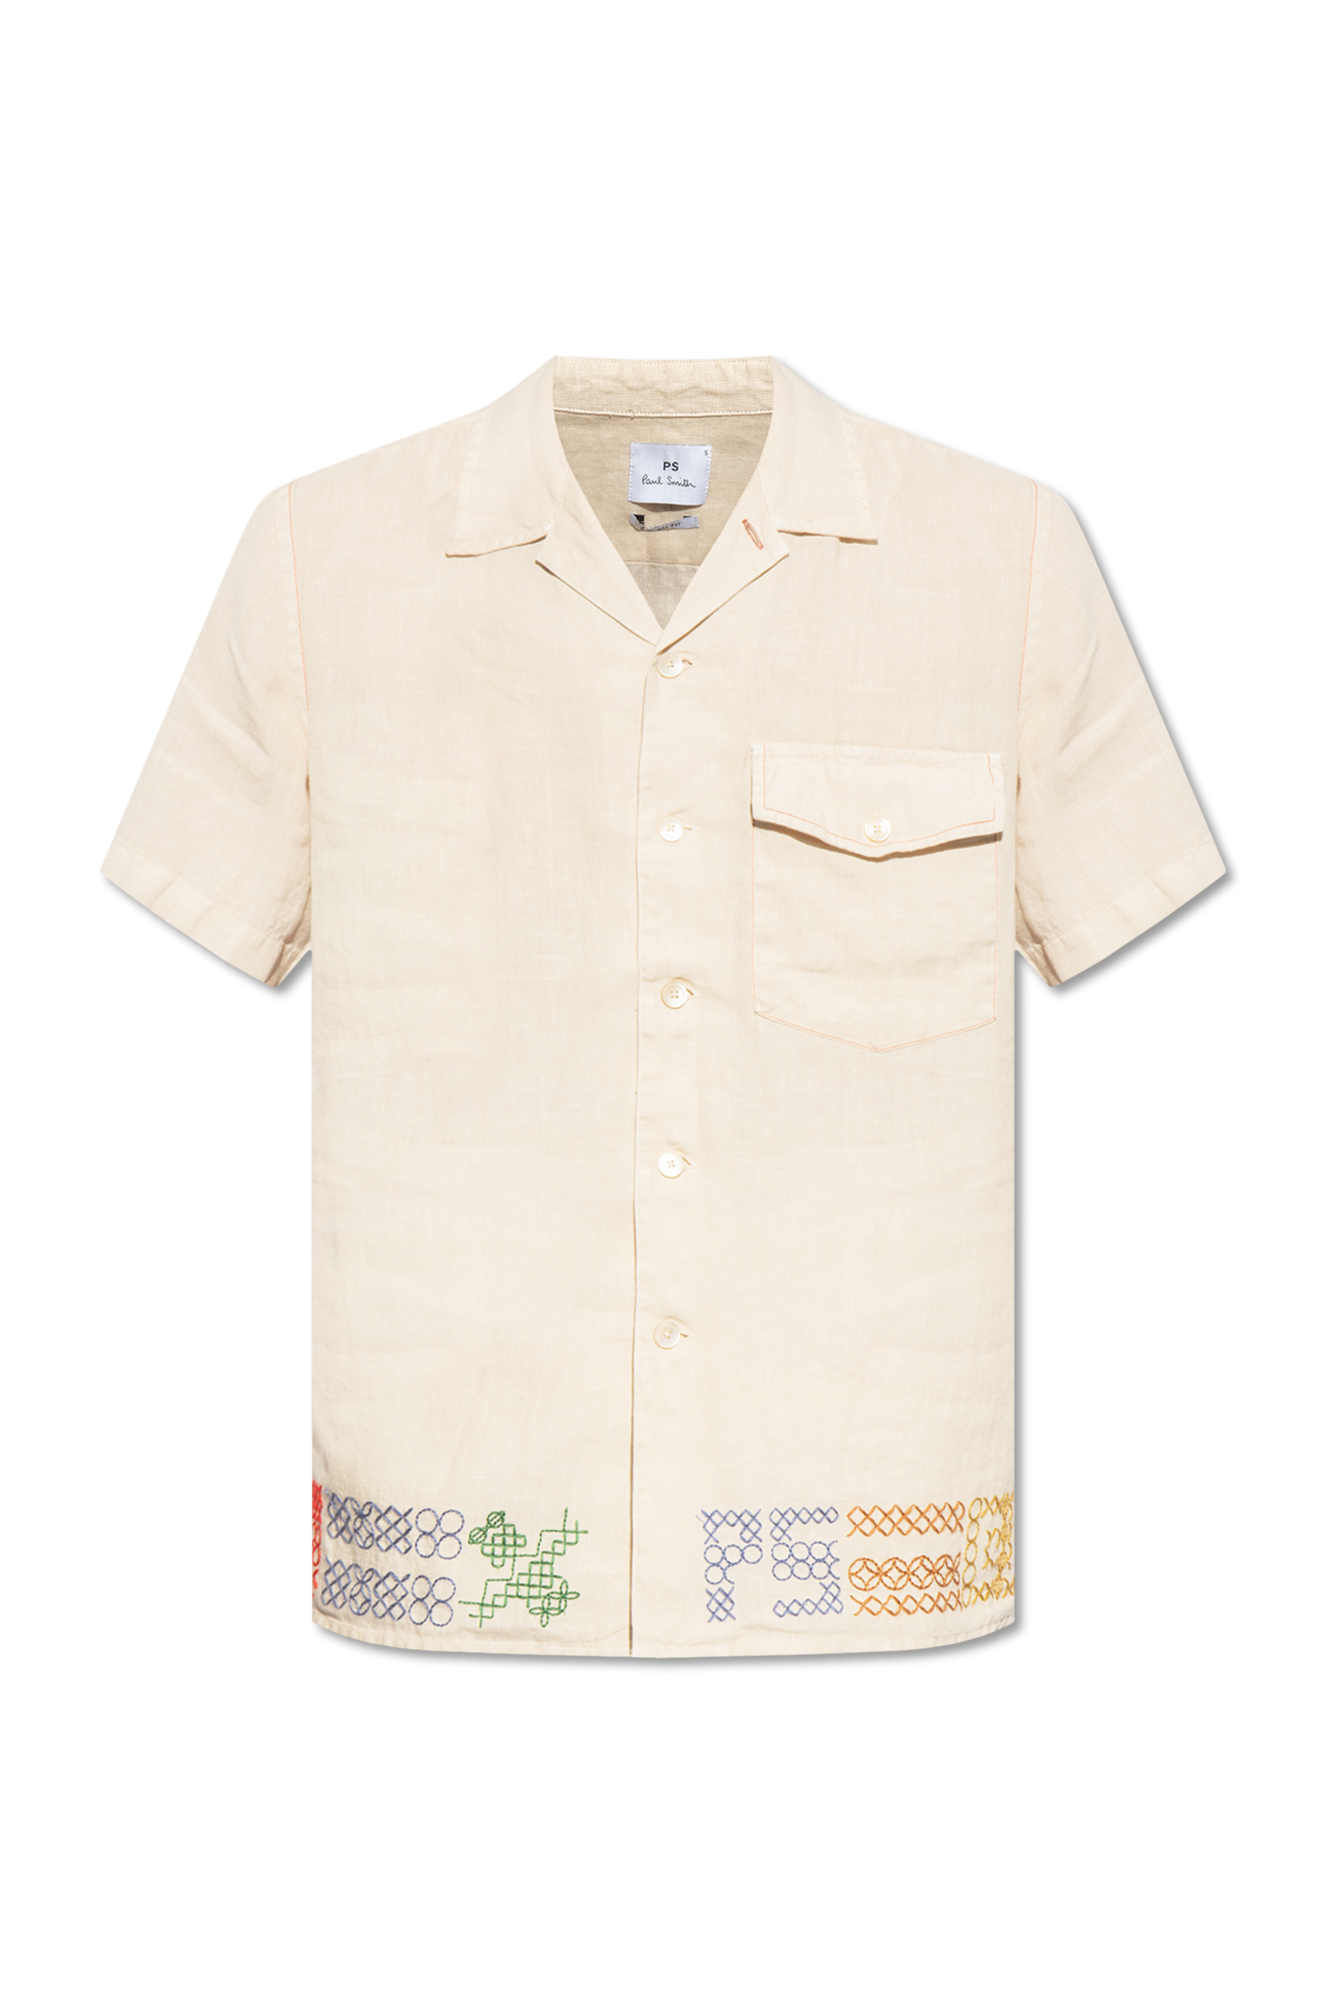 PS Paul Smith Linen shirt with short sleeves